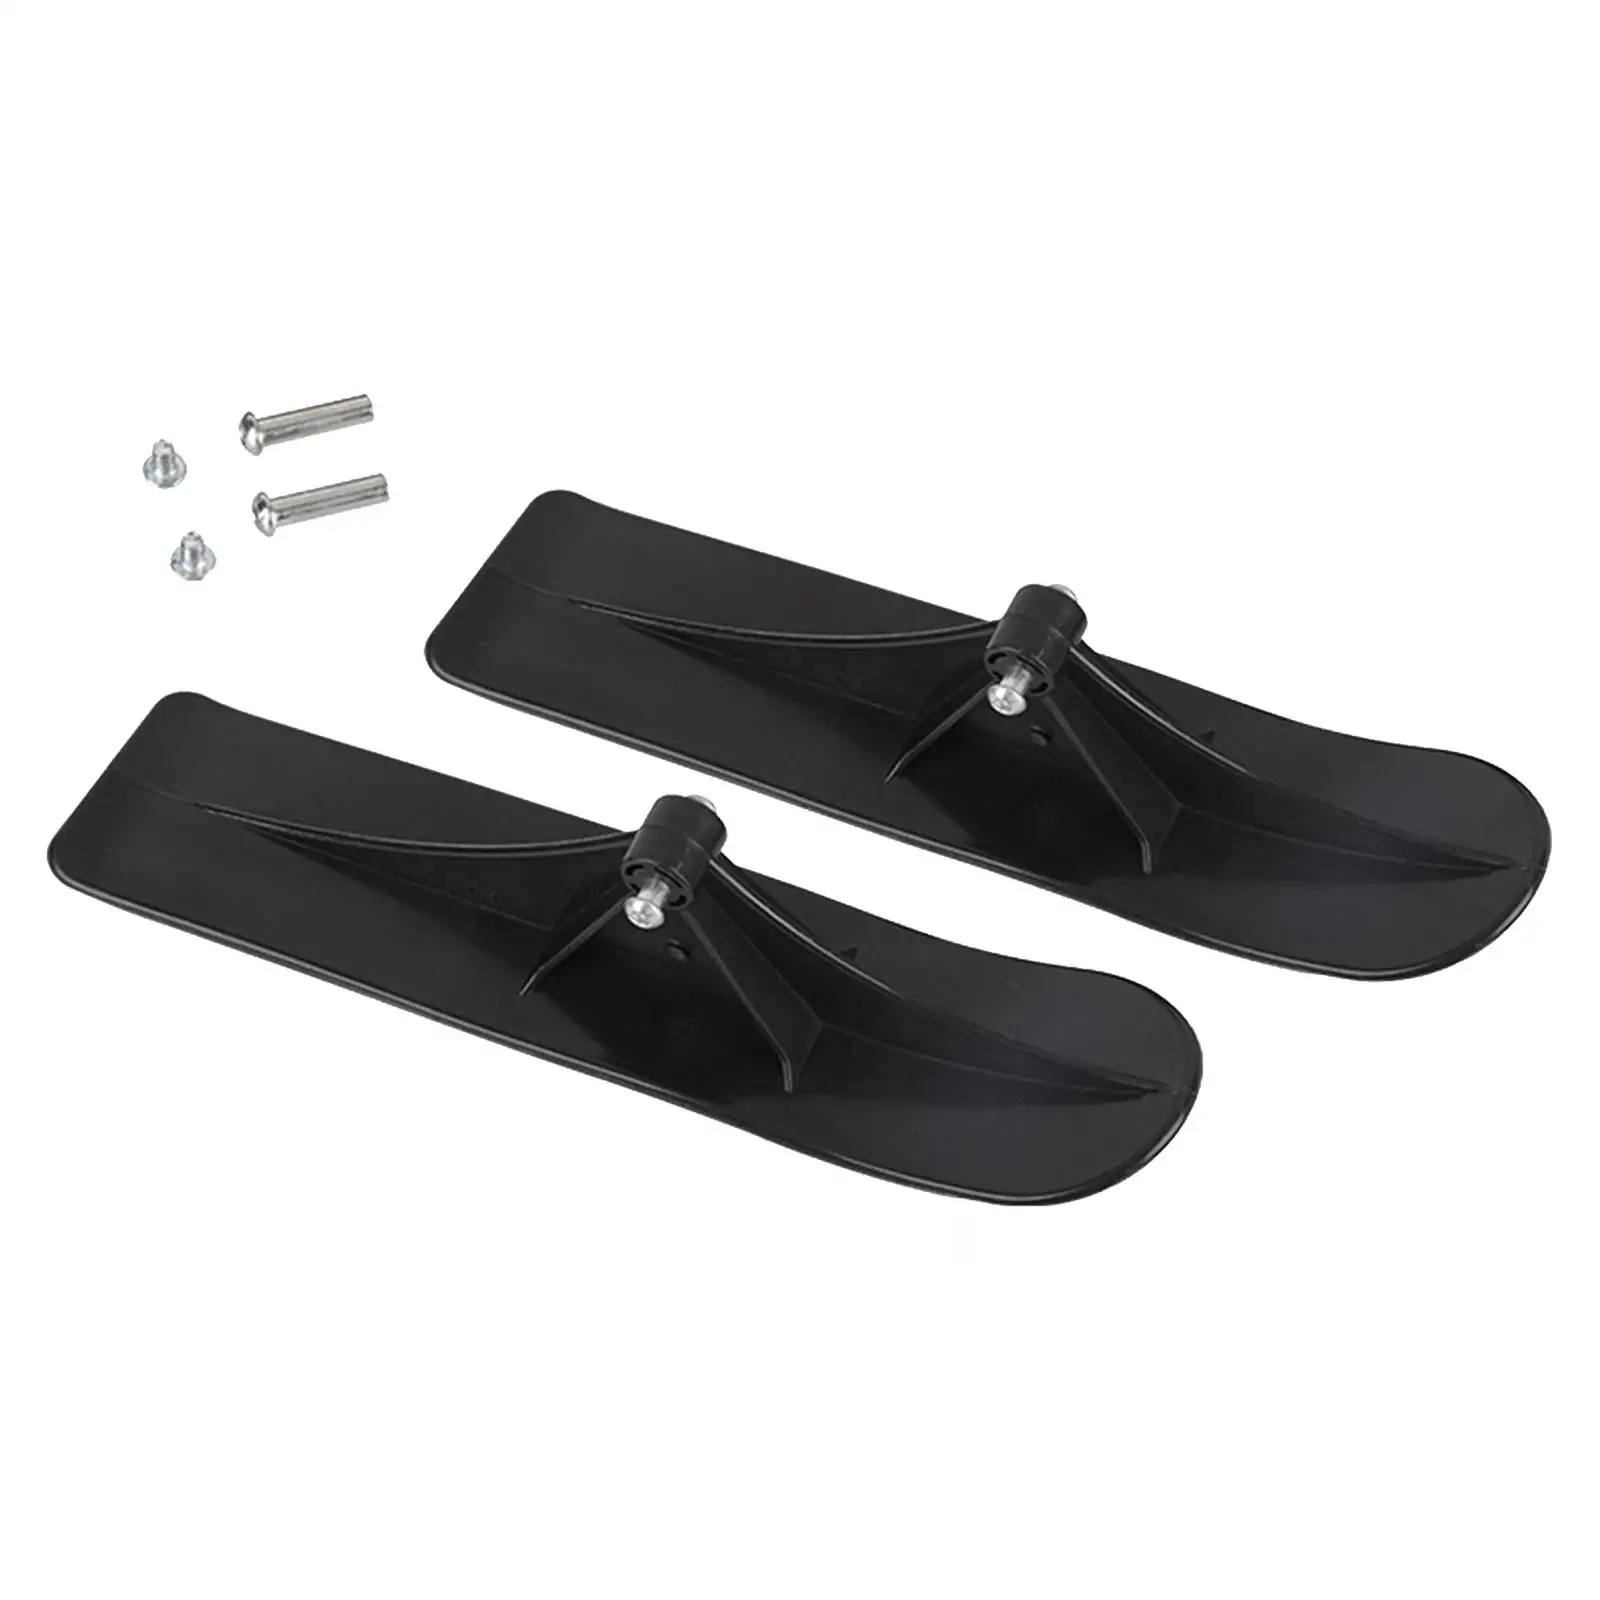 Snow Scooter Ski Sled with Screw Flat Bottom for Downhill Sleds Kids Novices